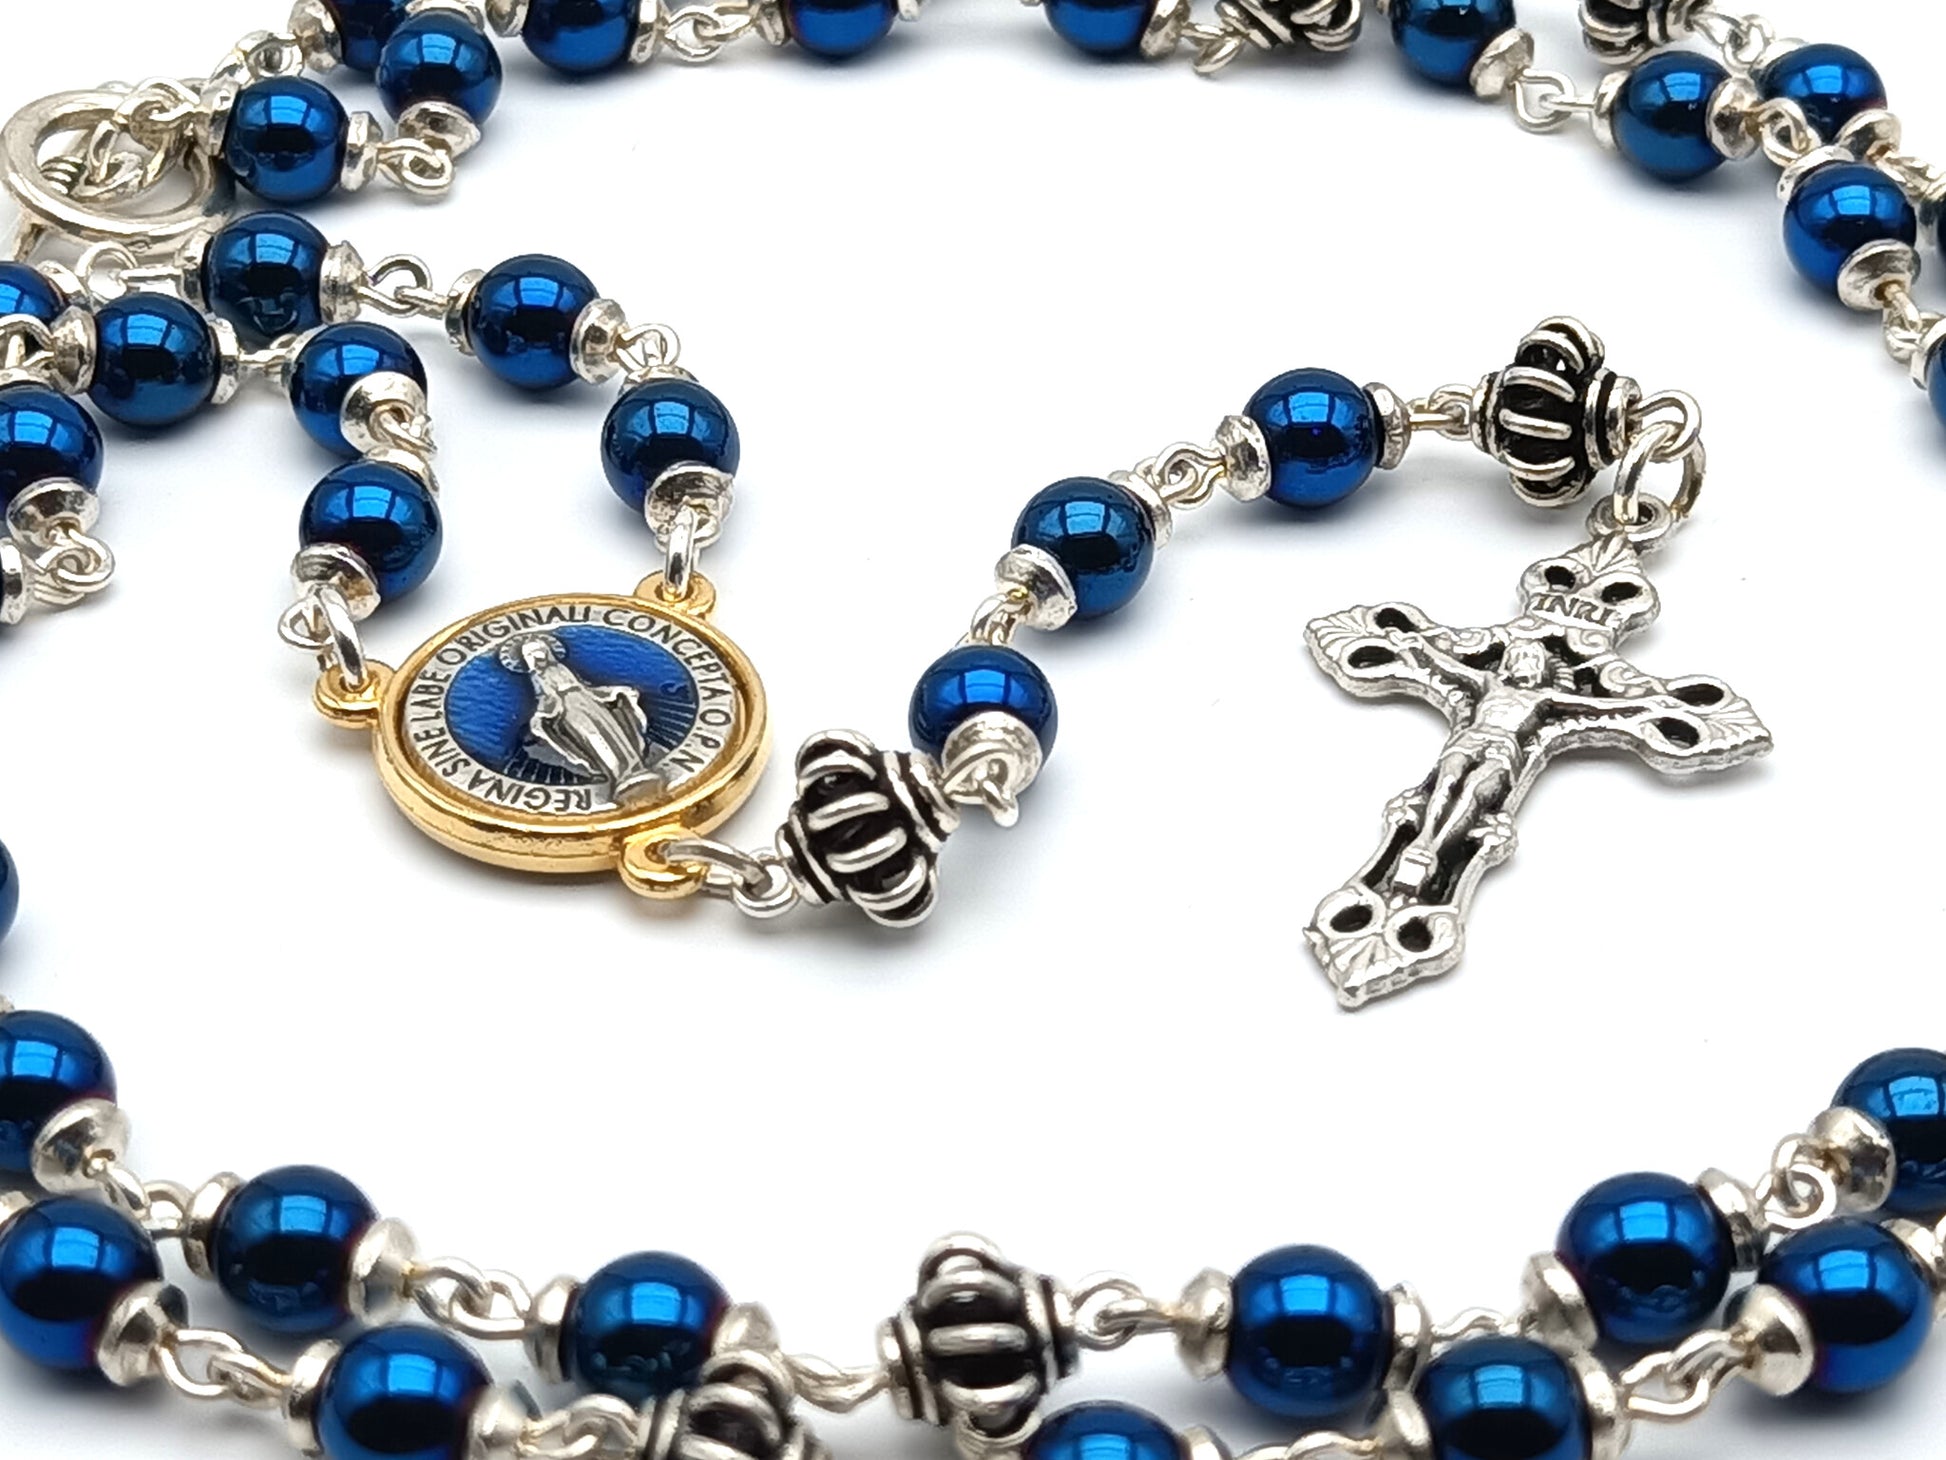 Miraculous medal unique rosary beads with blue hematite gemstone beads, silver crucifix, pater beads, clasp and gold centre medal.